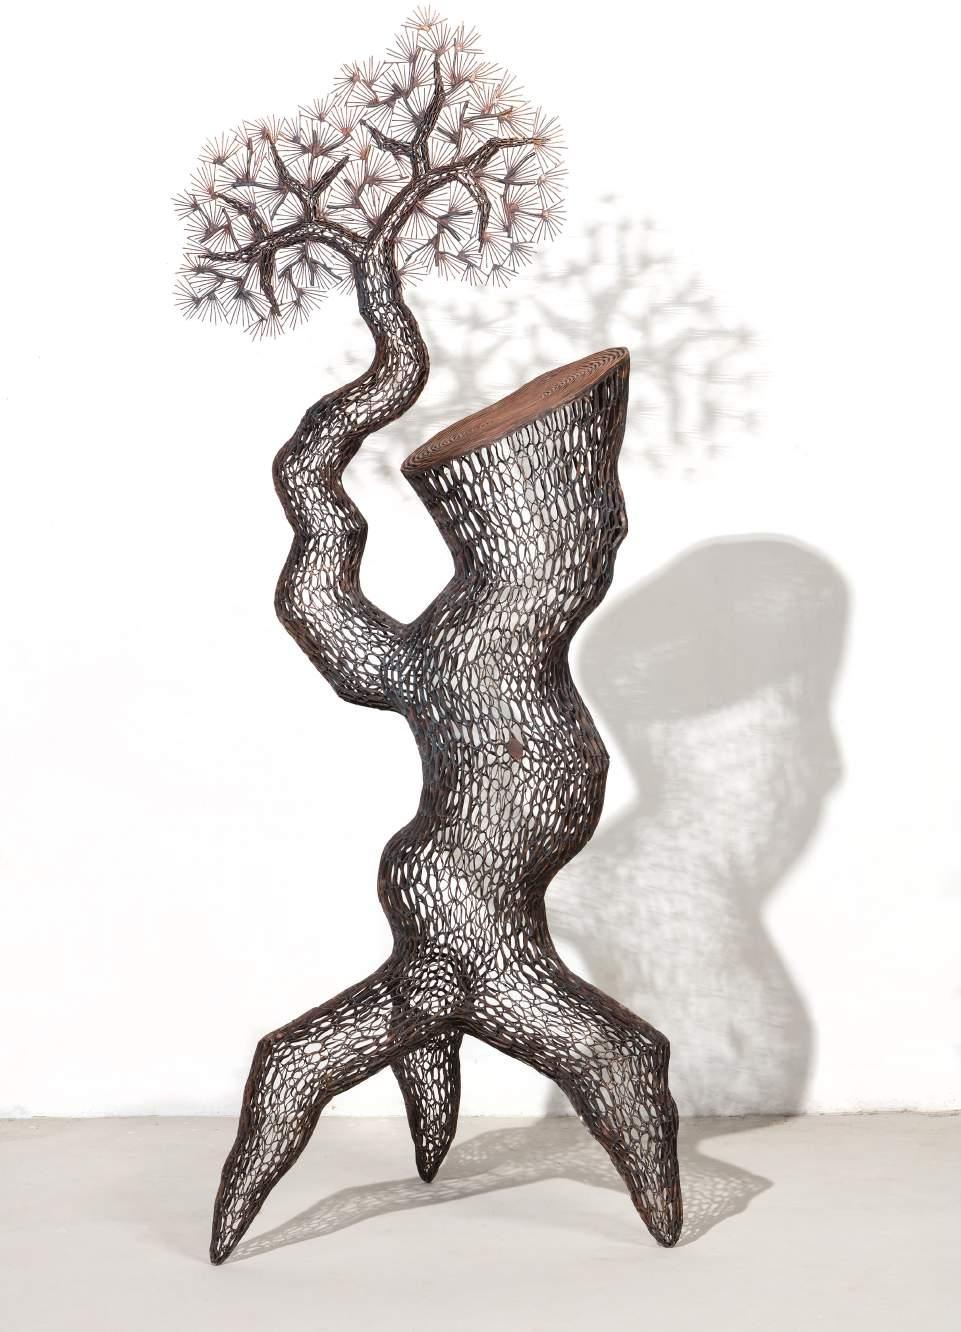 Above Pine Tree, 2013 Welded copper 110 x